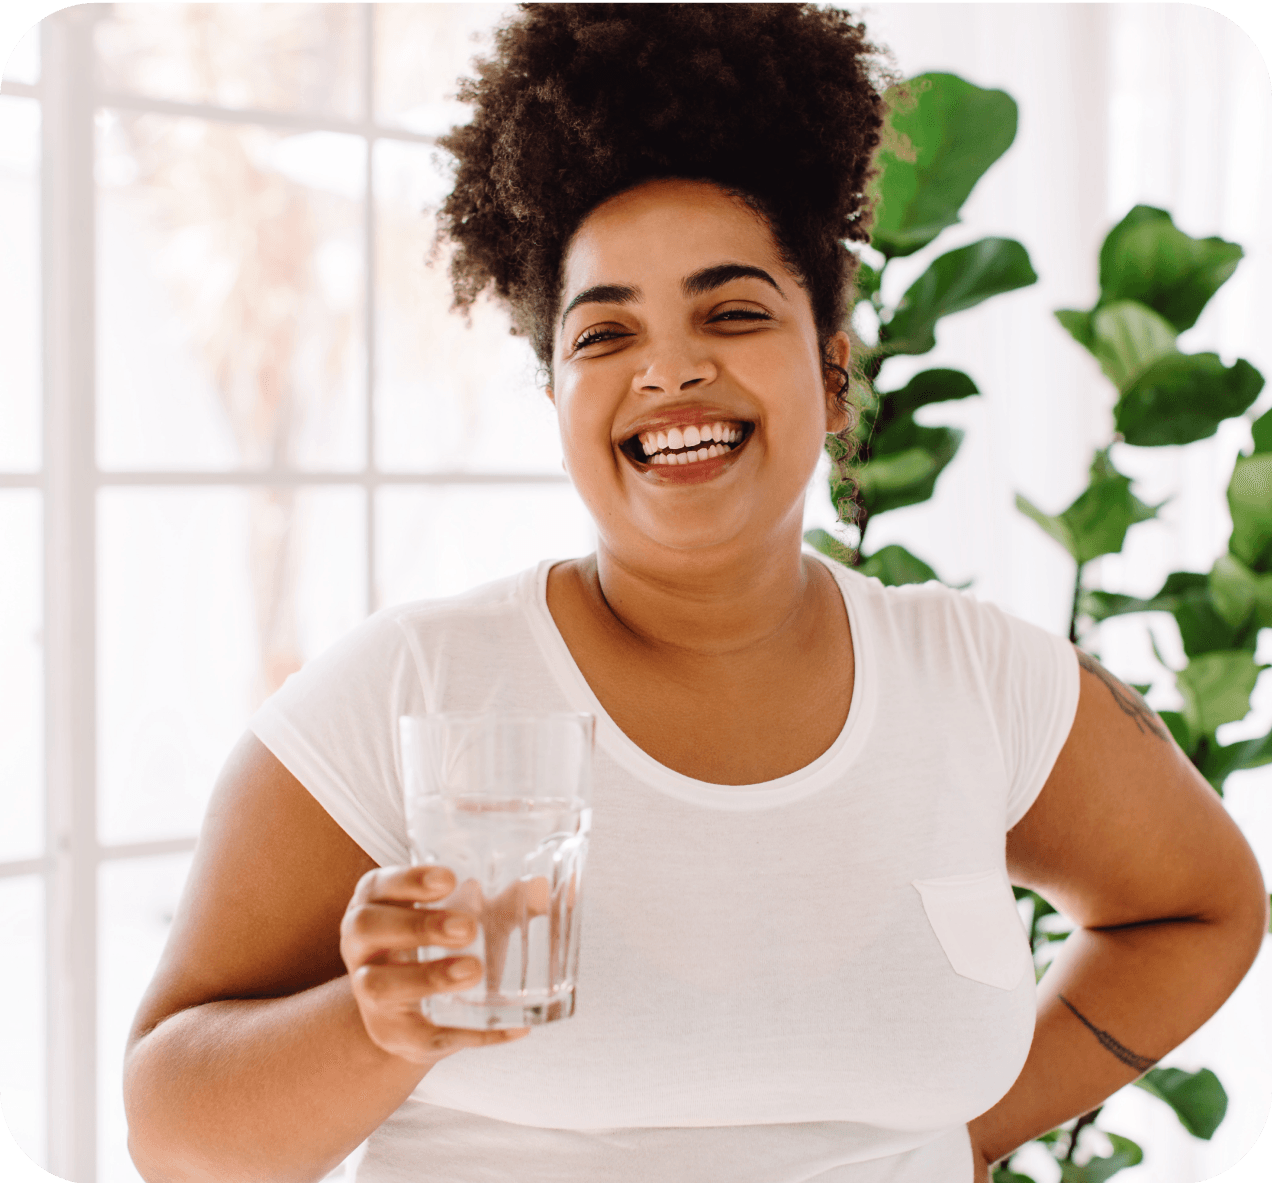 Woman smiling and holding a glass of water